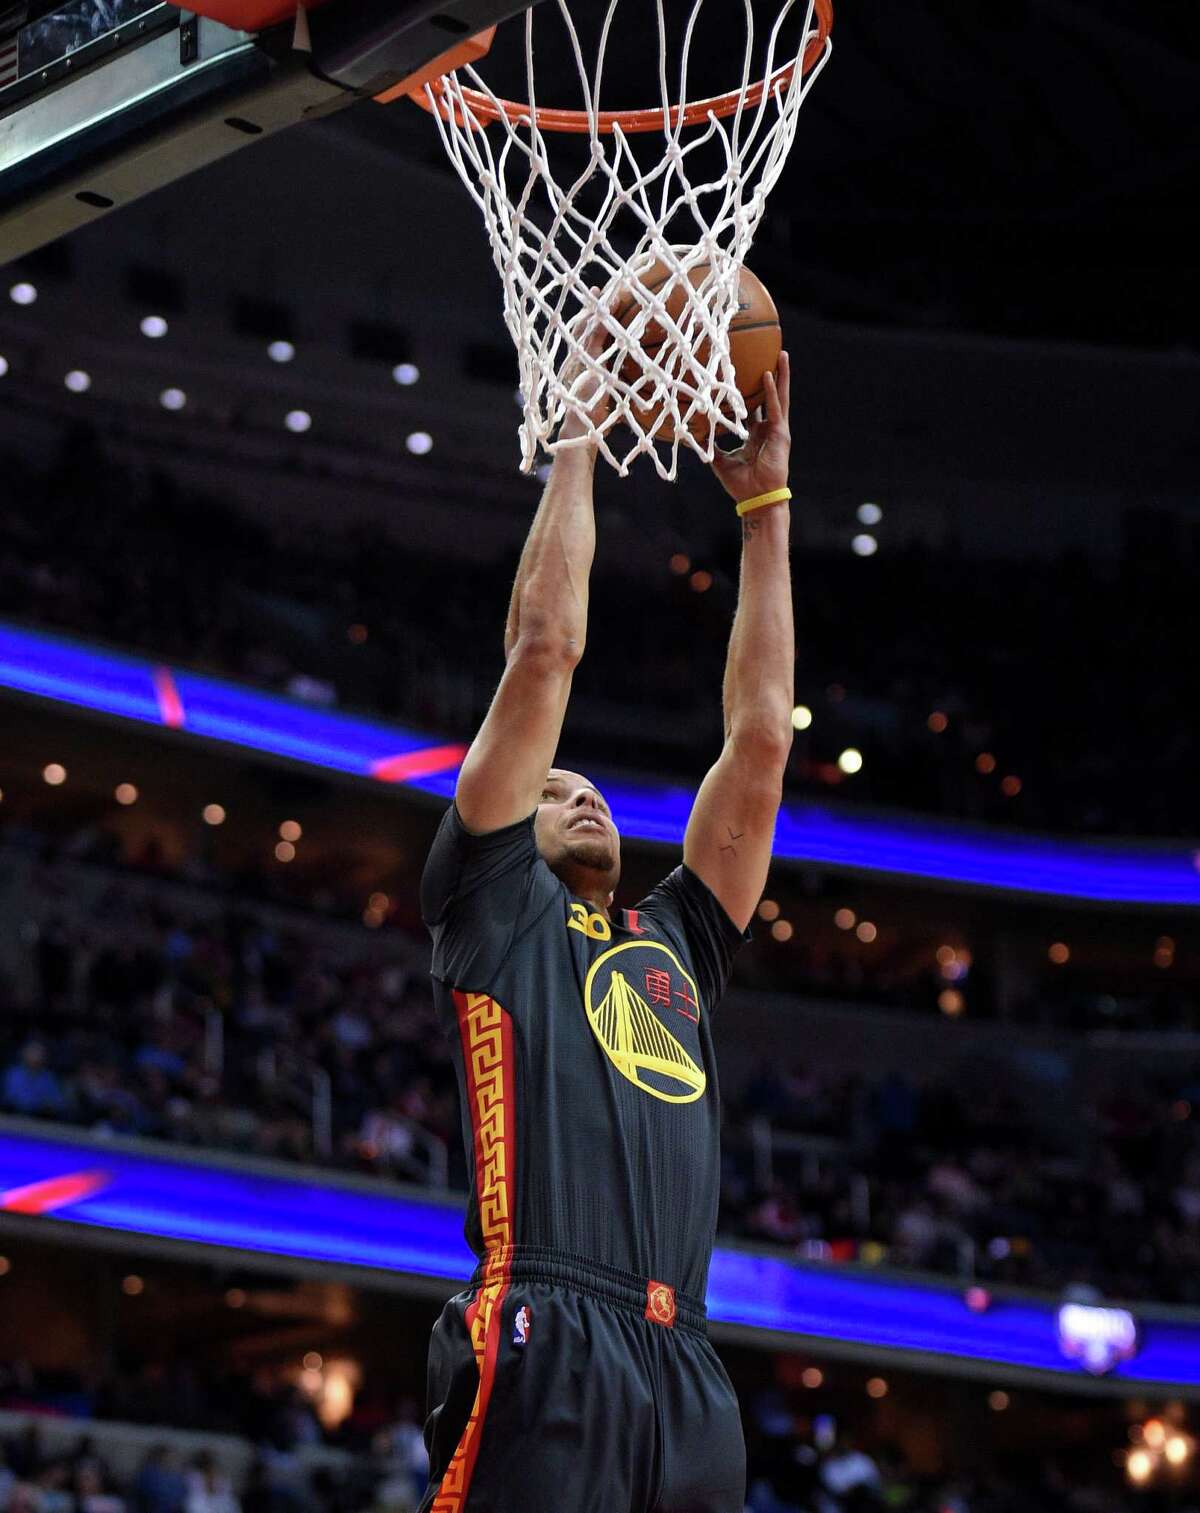 Golden State Warriors guard Stephen Curry (30) goes to the basket against the Washington Wizards during the first half of an NBA basketball game, Tuesday, Feb. 24, 2015, in Washington. (AP Photo/Nick Wass)